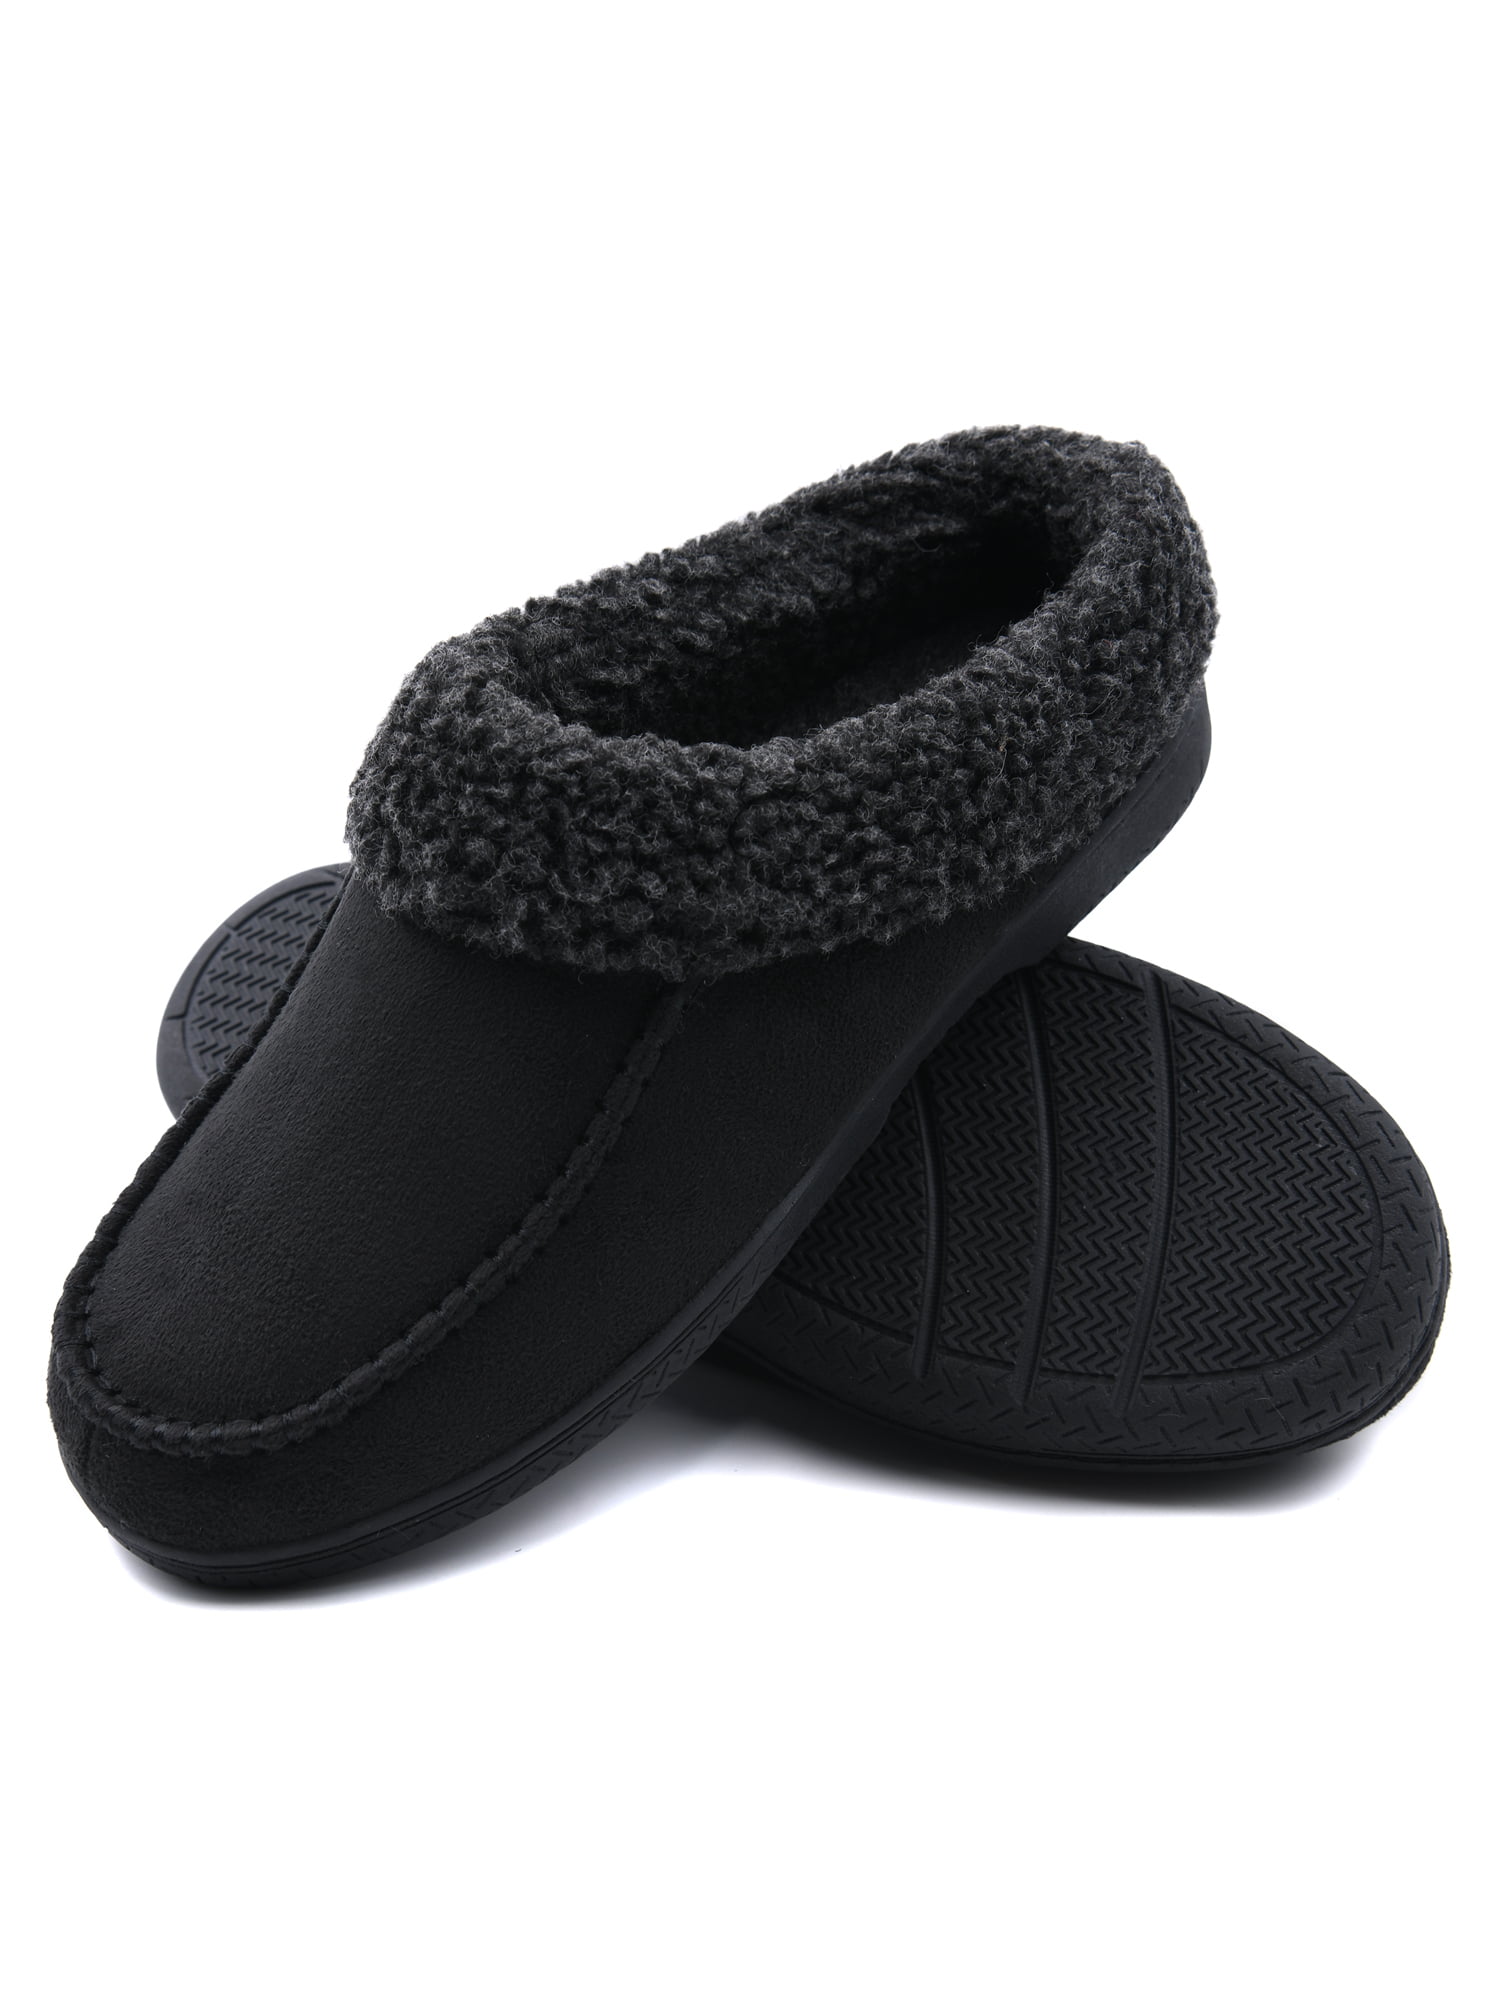 DL Mens Memory Foam Moccasin Slippers Breathable Moccasin Slippers Micro Wool House Shoes Anti-Slip Sole Indoor Outdoor 